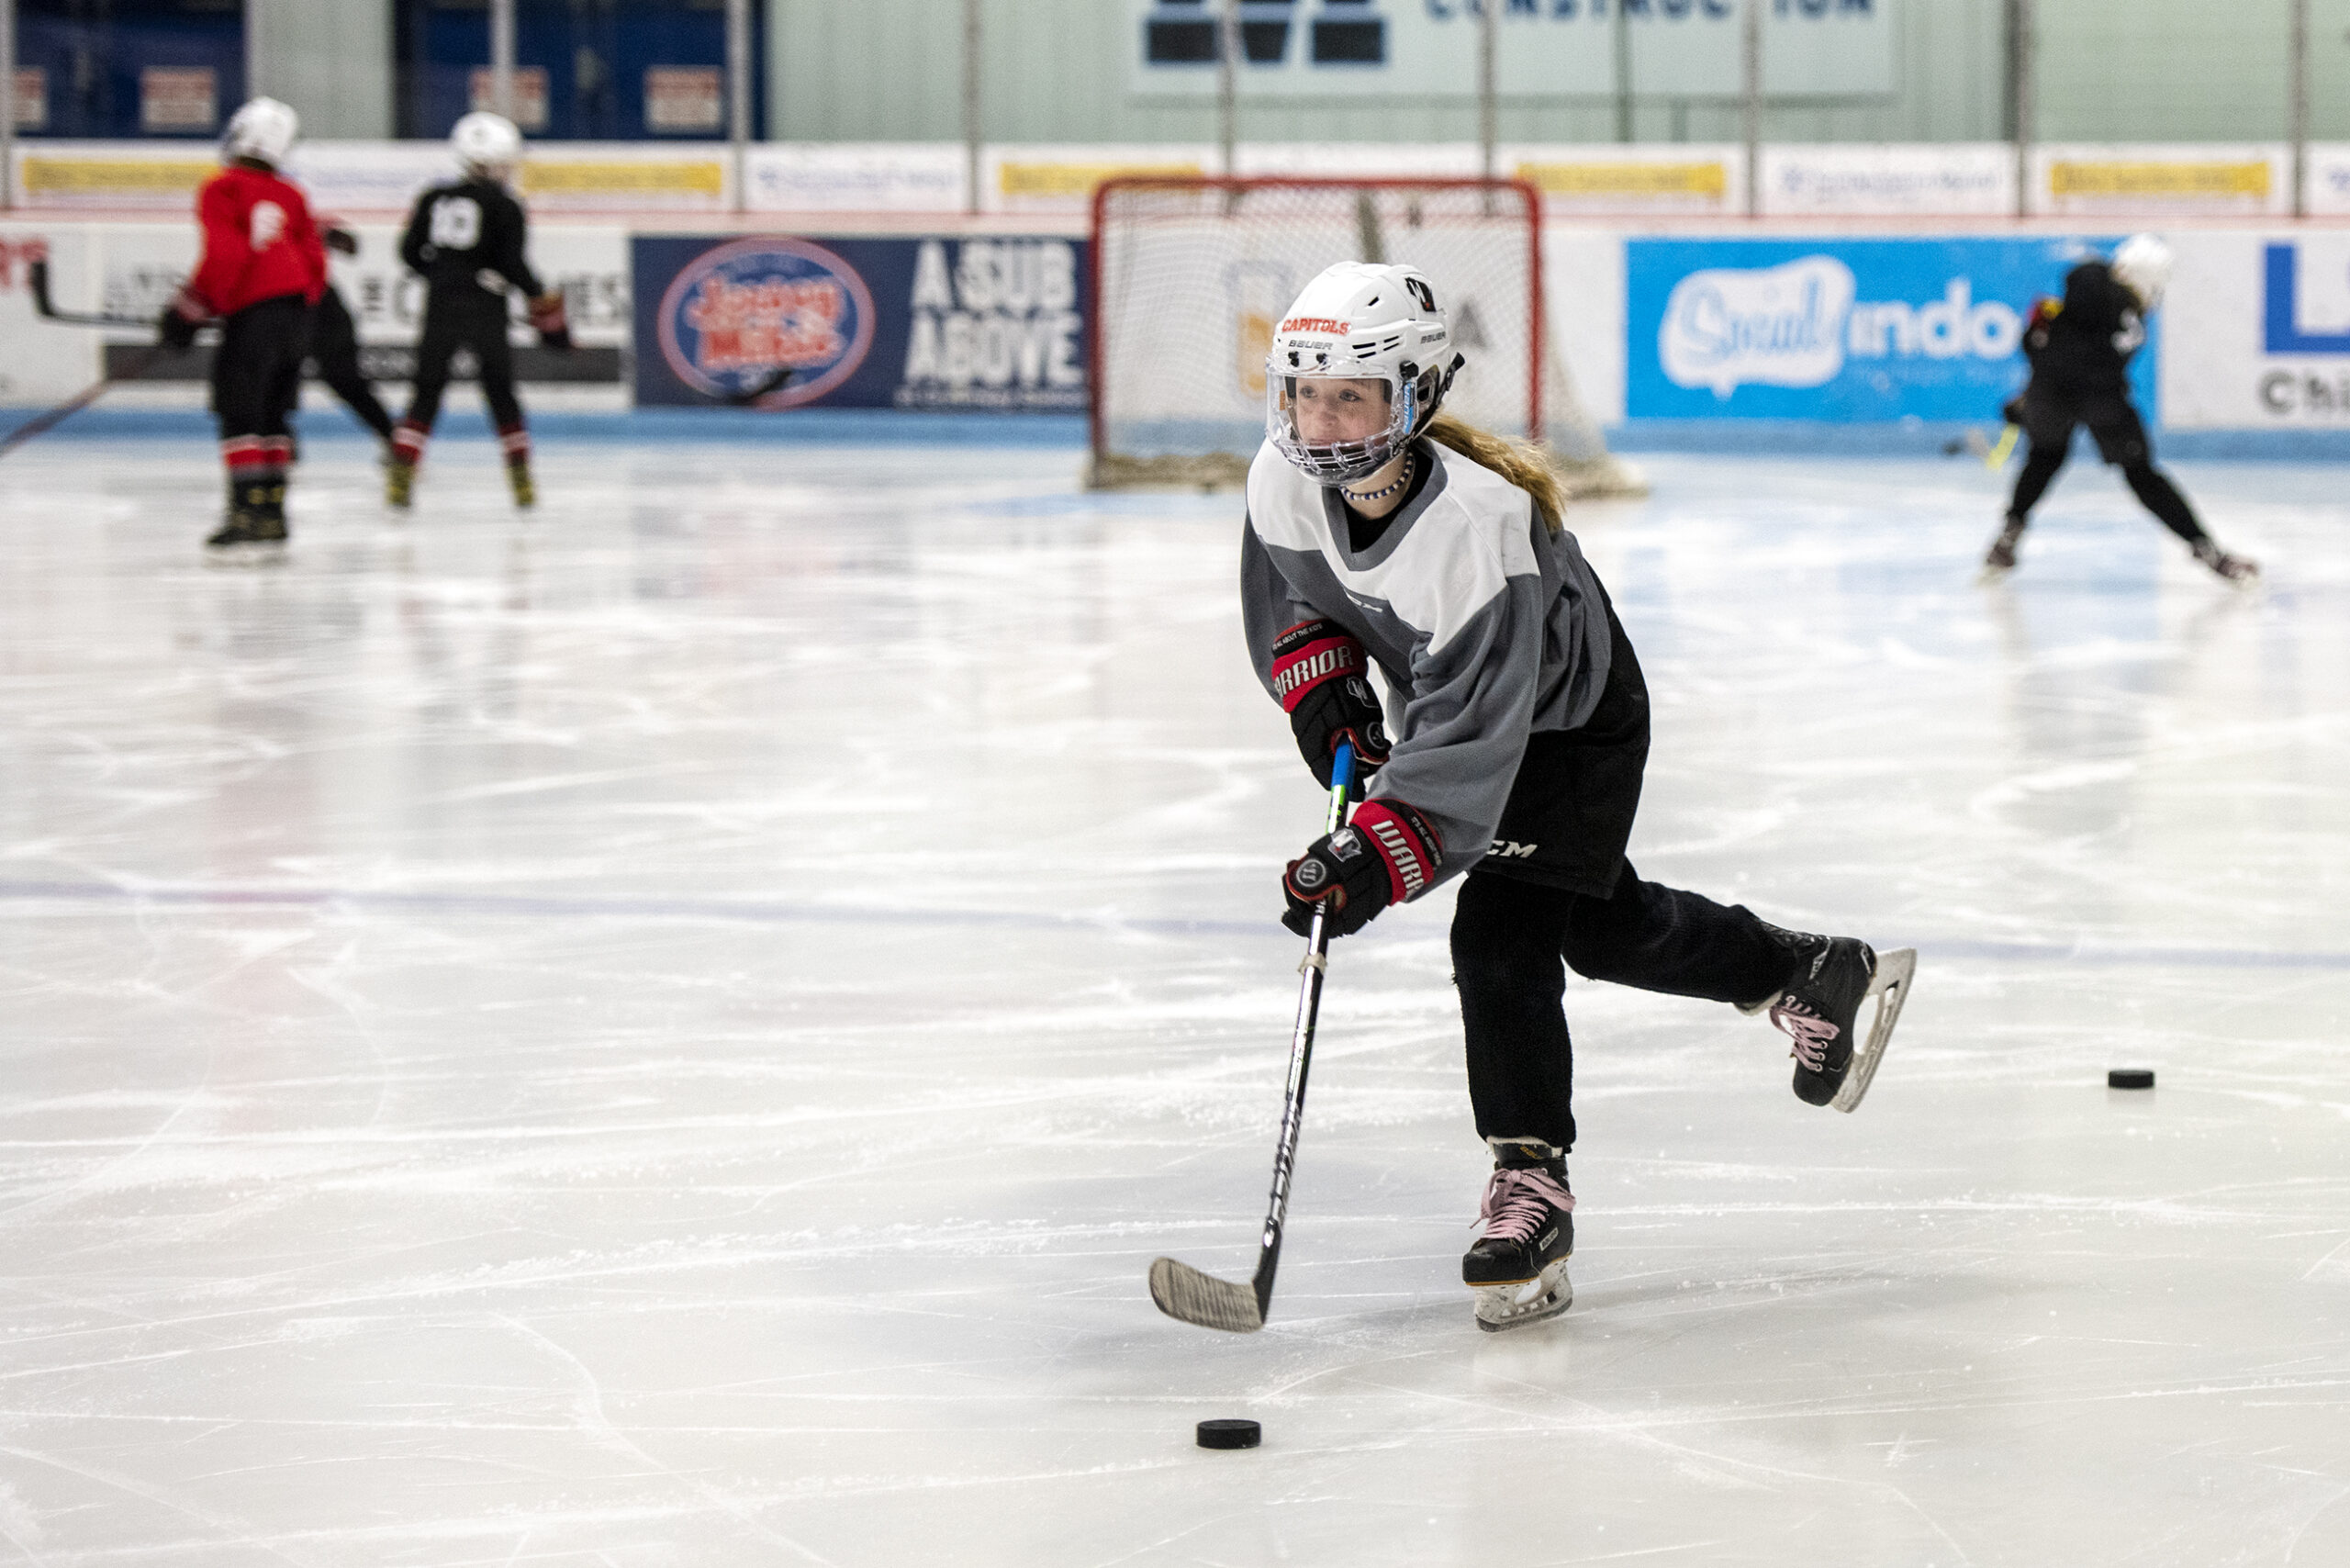 A girl in hockey gear moves a puck across the ice.